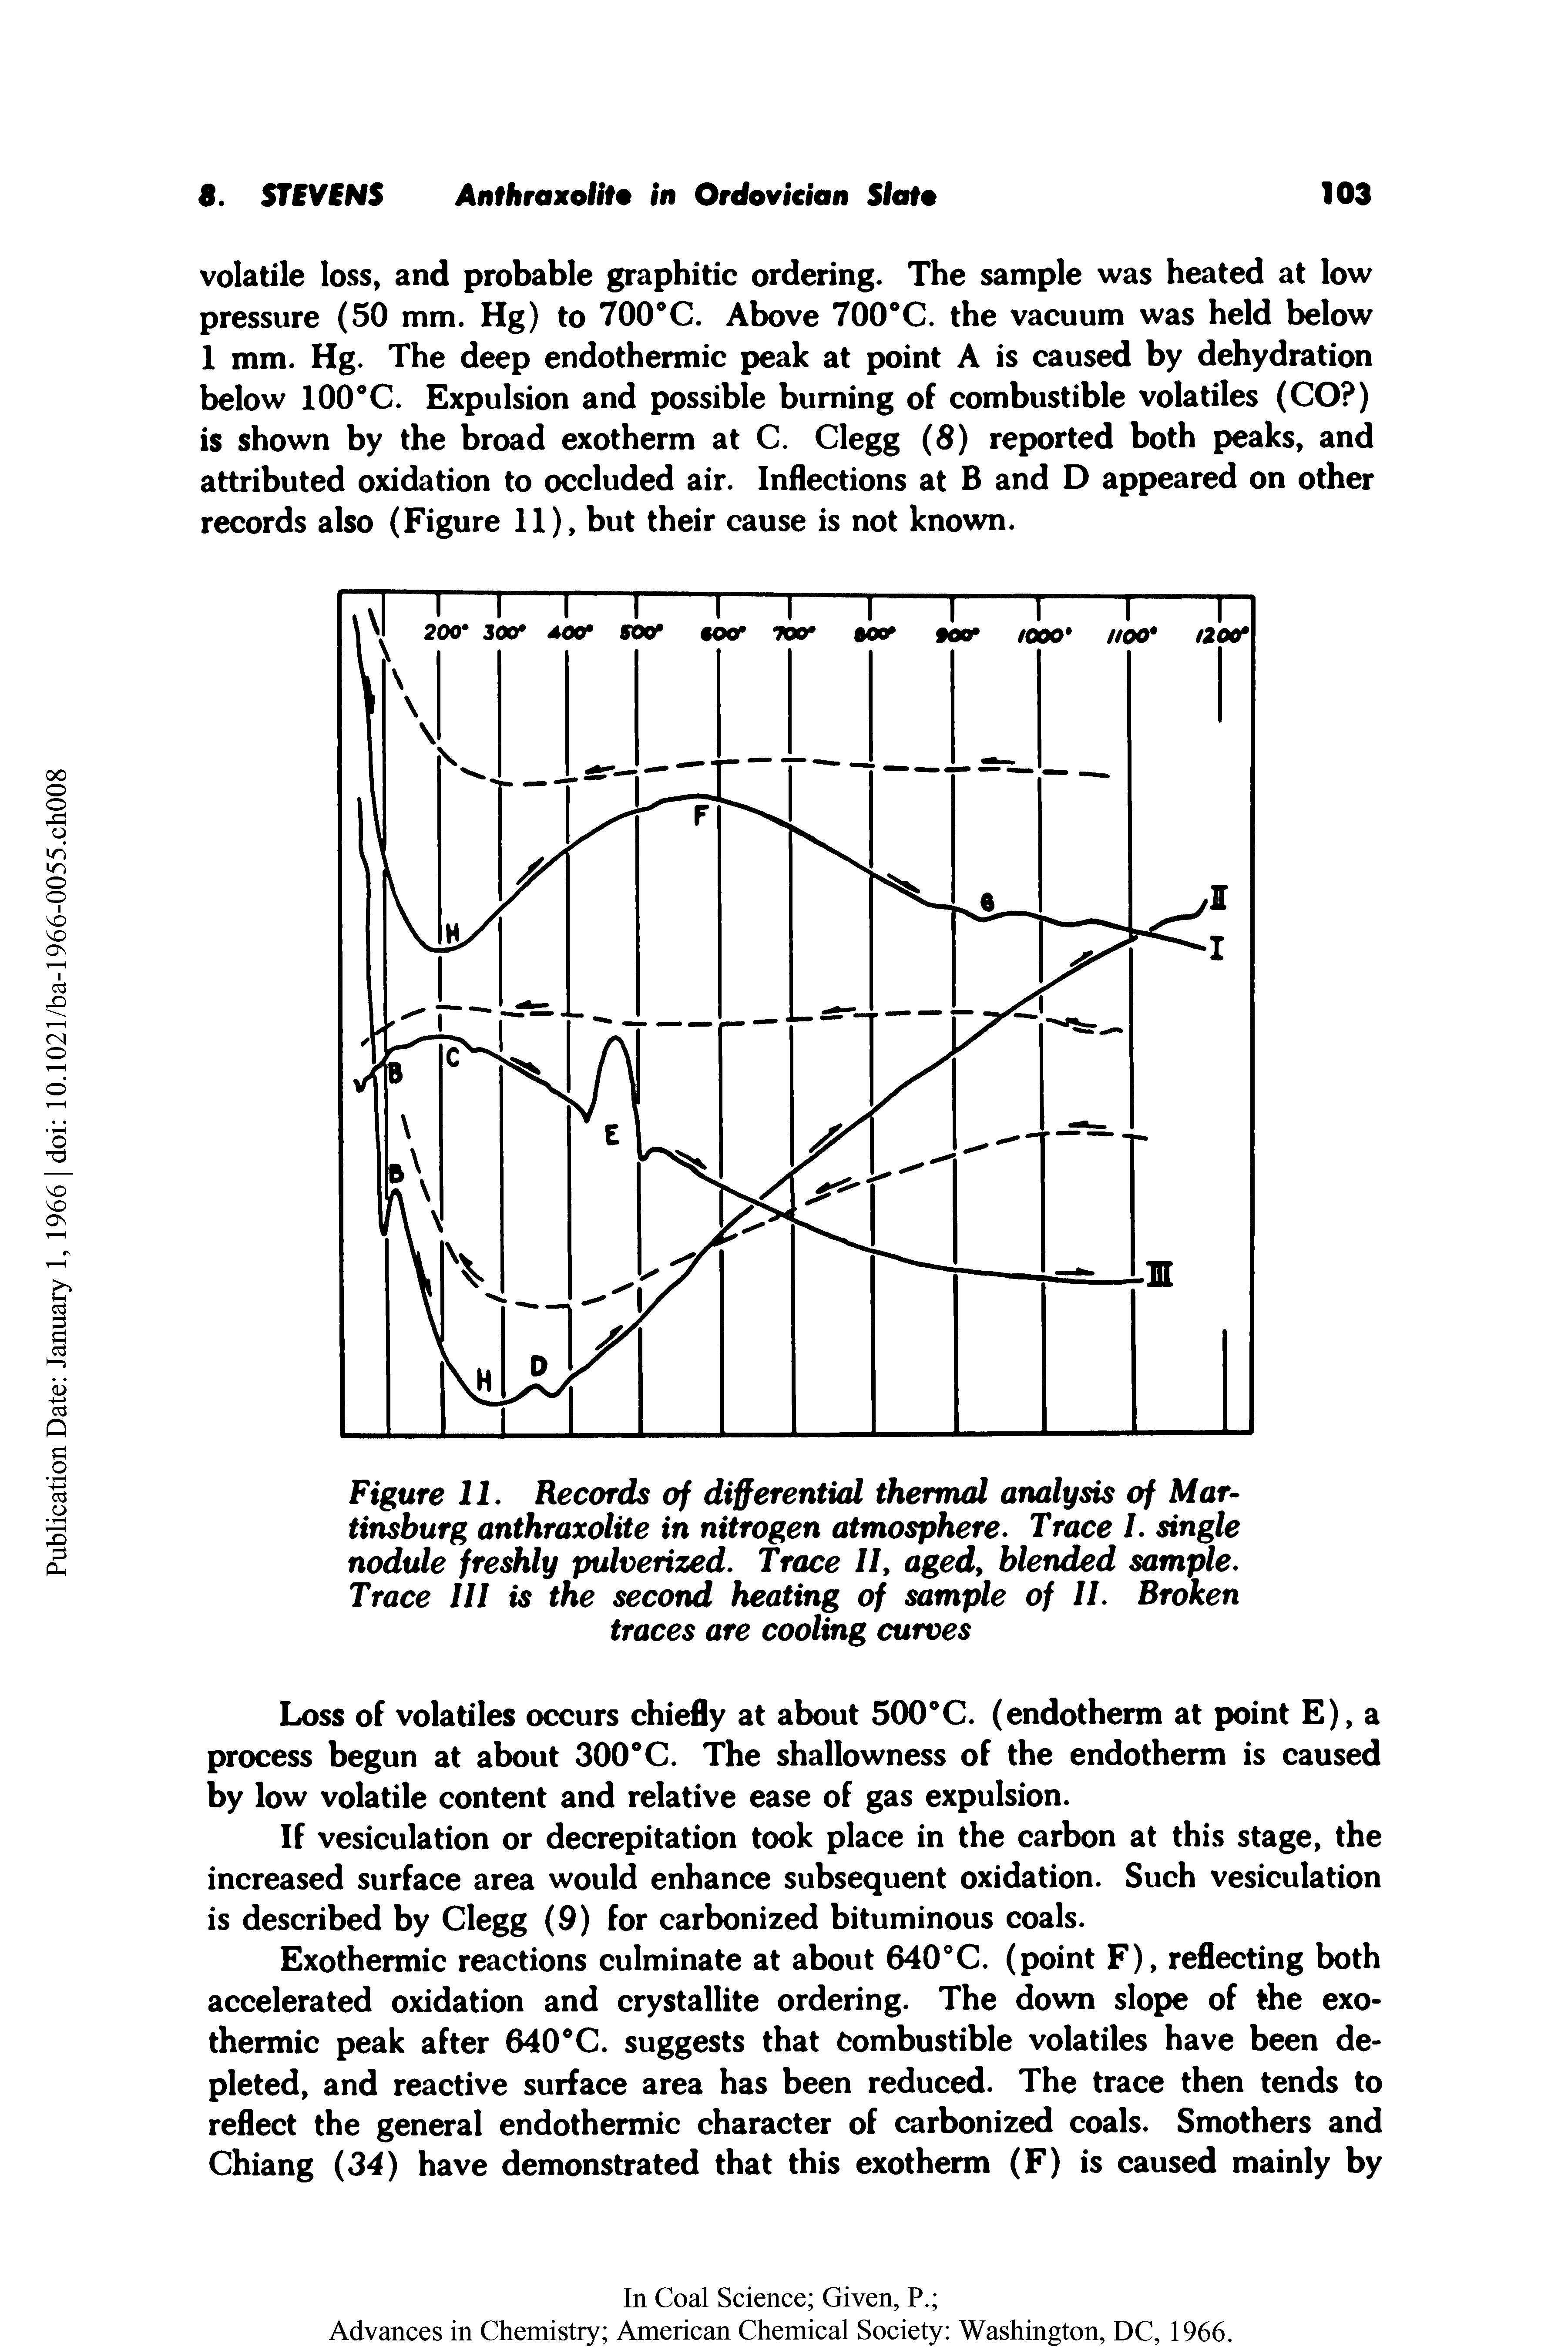 Figure II. Records of differential thermal analysis of Mar-tinsburg anthraxolite in nitrogen atmosphere. Trace I. single nodule freshly pulverized. Trace II, aged, blended sample.